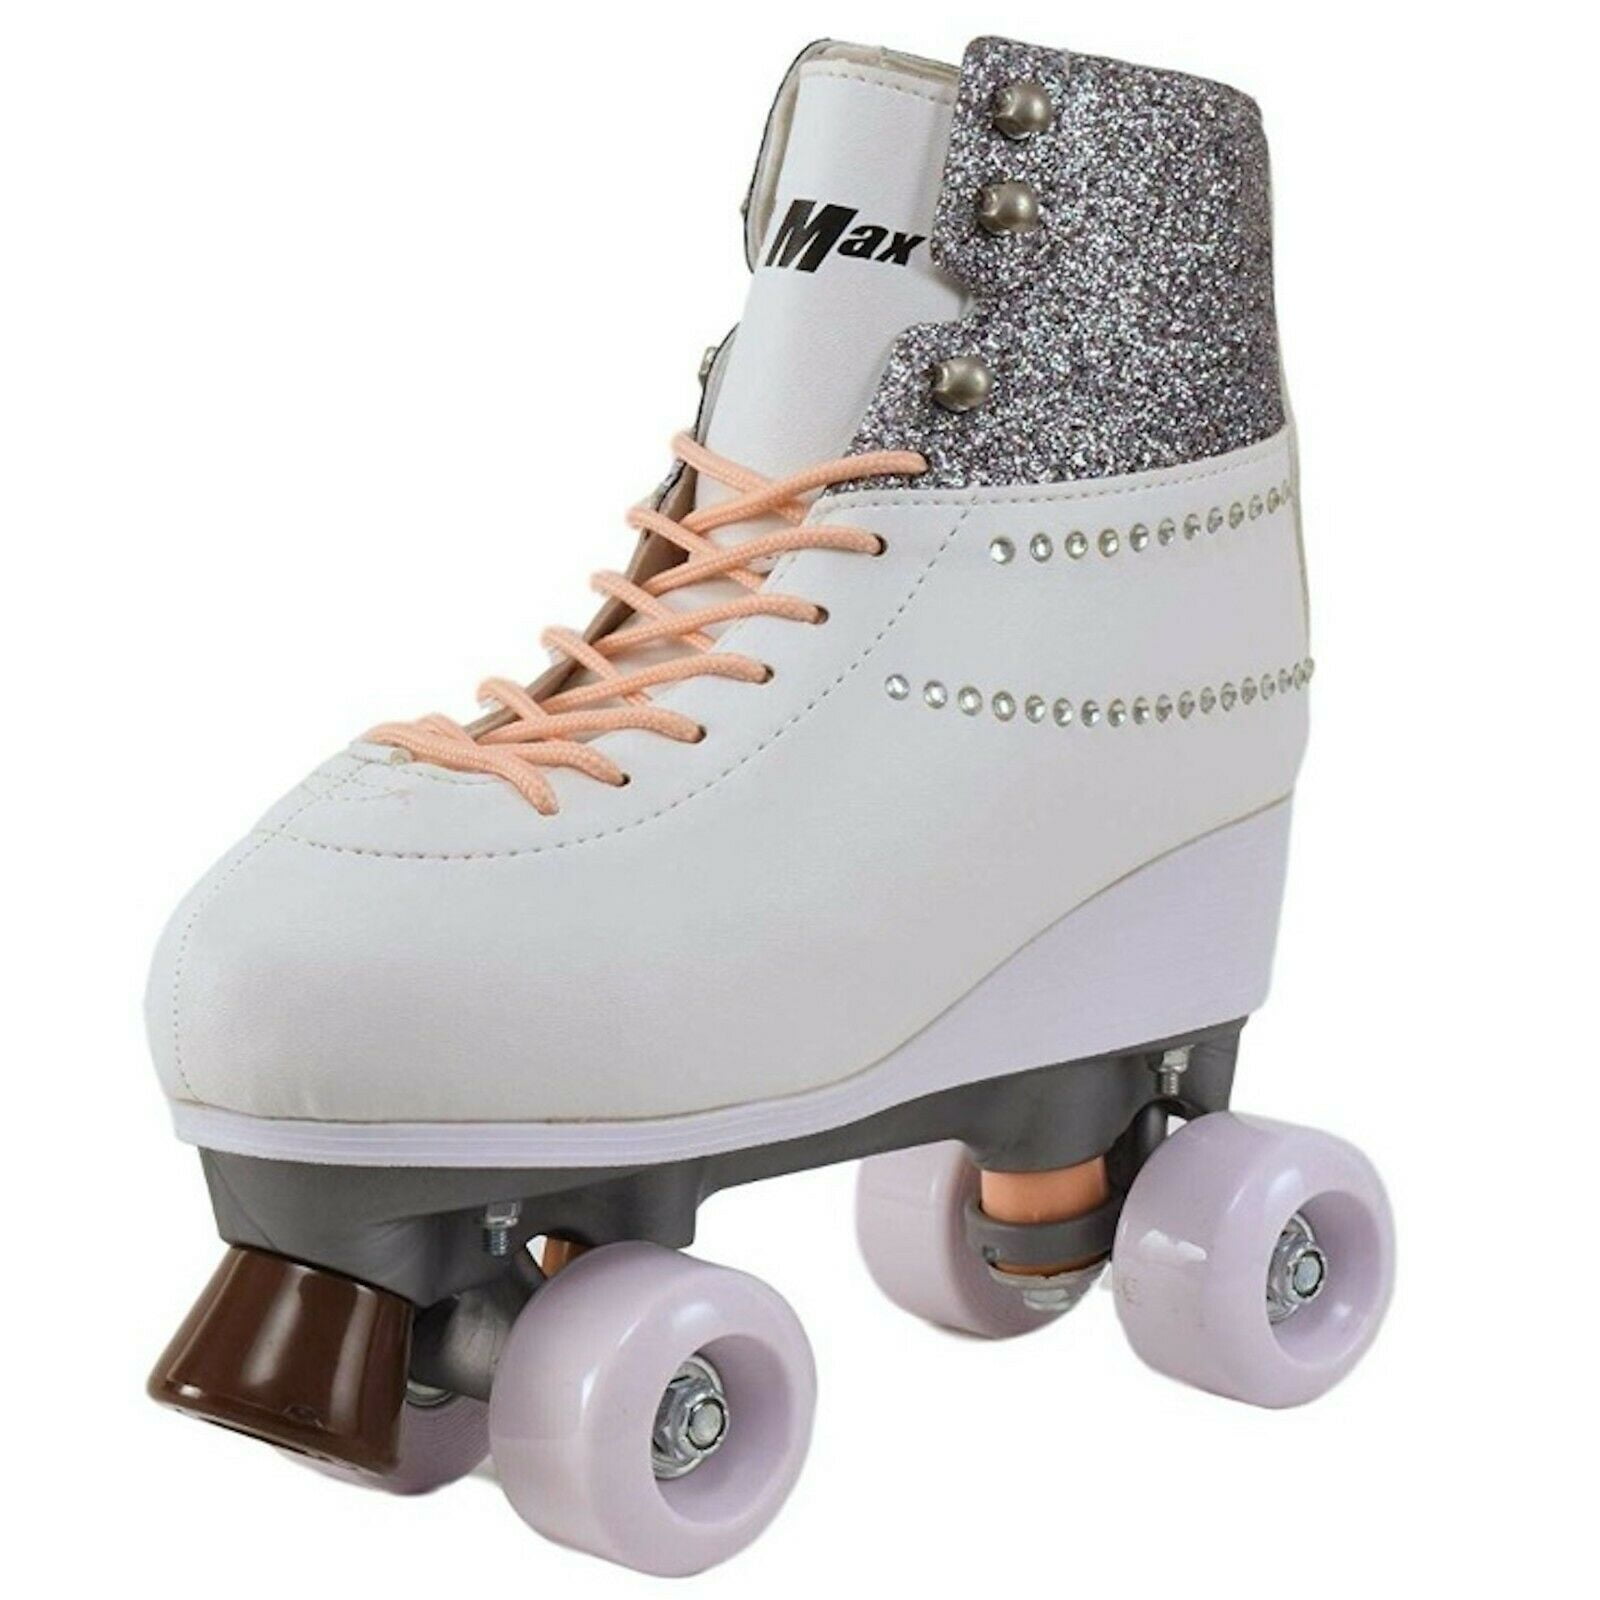 Women's Roller Skates Adjustable PU Leather High Top Double Row Skates Classic Shiny Roller Skates for Beginner Kids Adults and Youth Indoor and Outdoor Use 